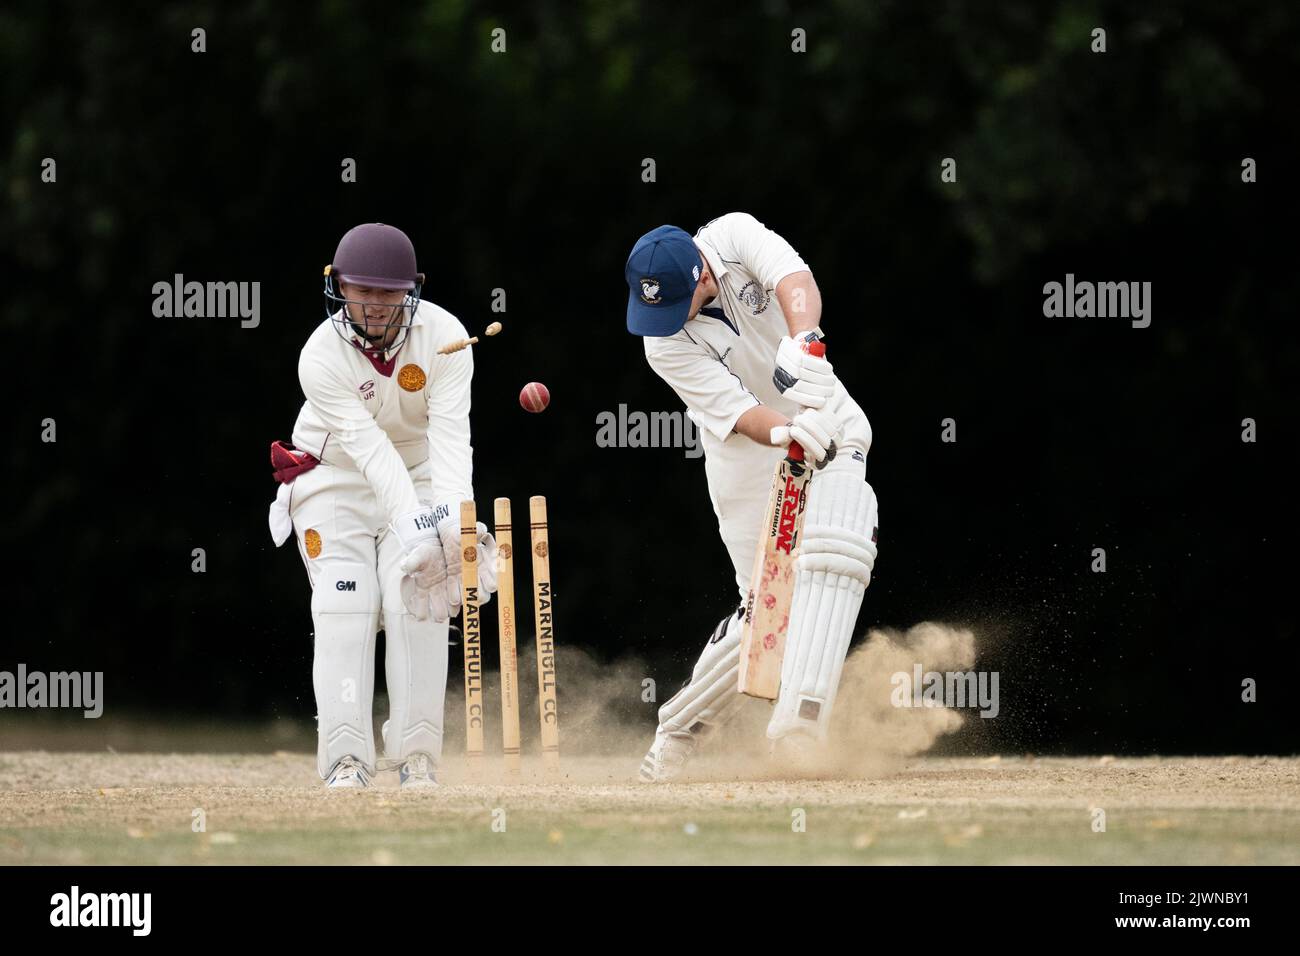 Batsman being bowled out Stock Photo